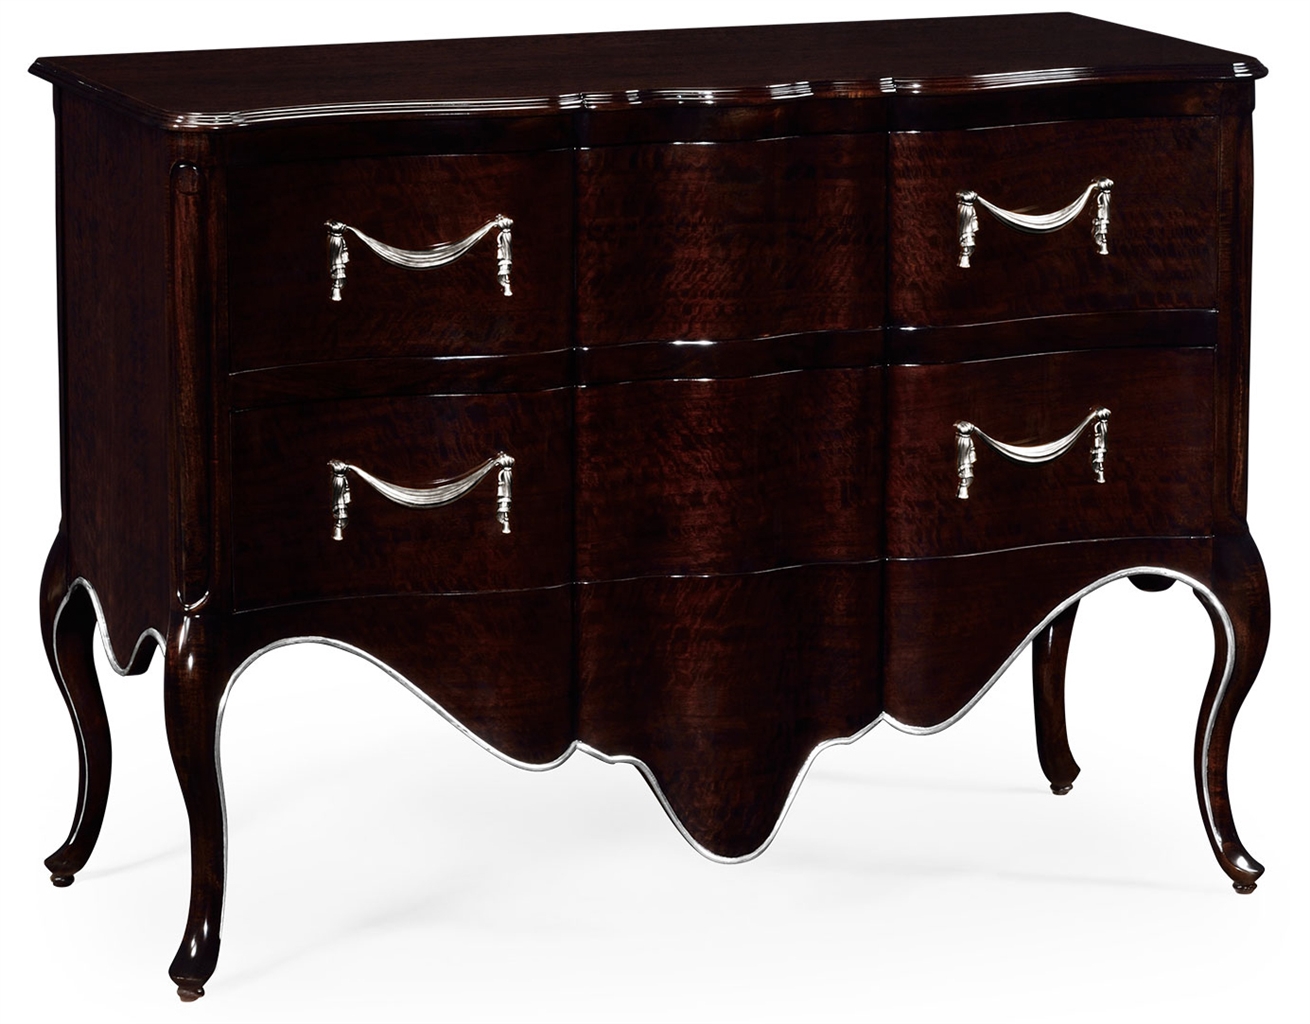 LUXURY BEDROOM FURNITURE Luxurious Drawer Chest